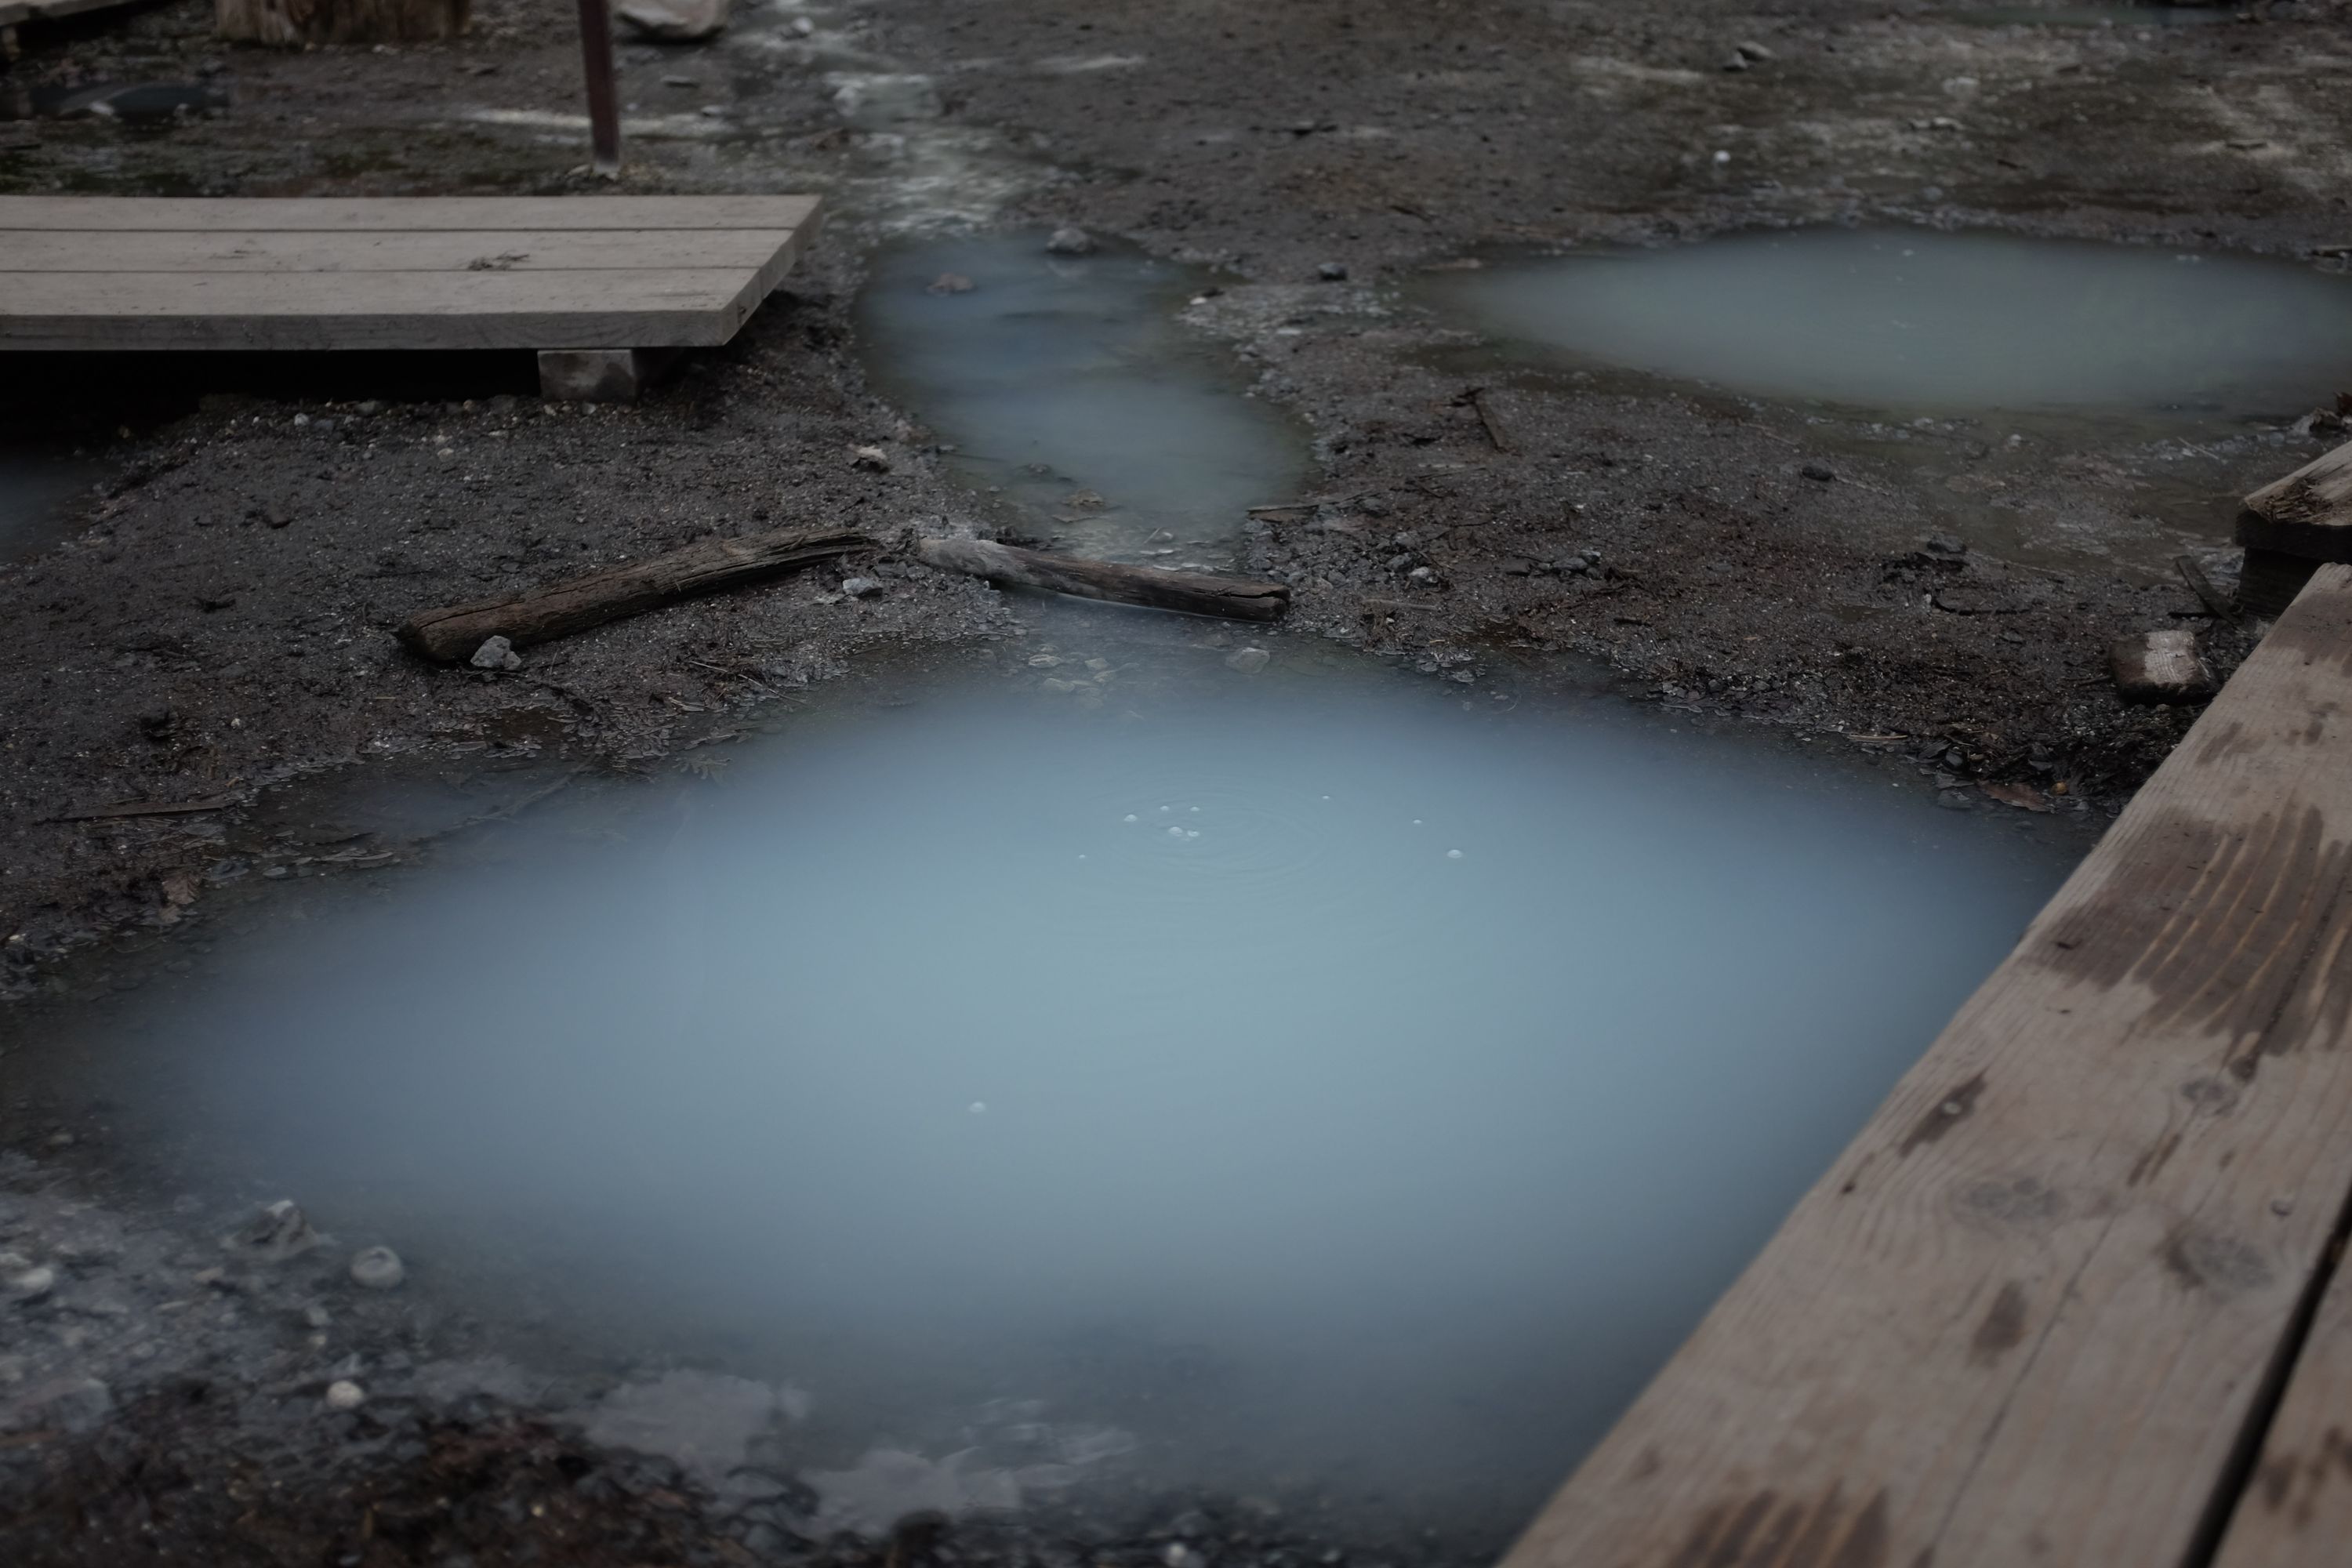 Blue-gray mineral water bubbles up from the ground and forms a small pool.